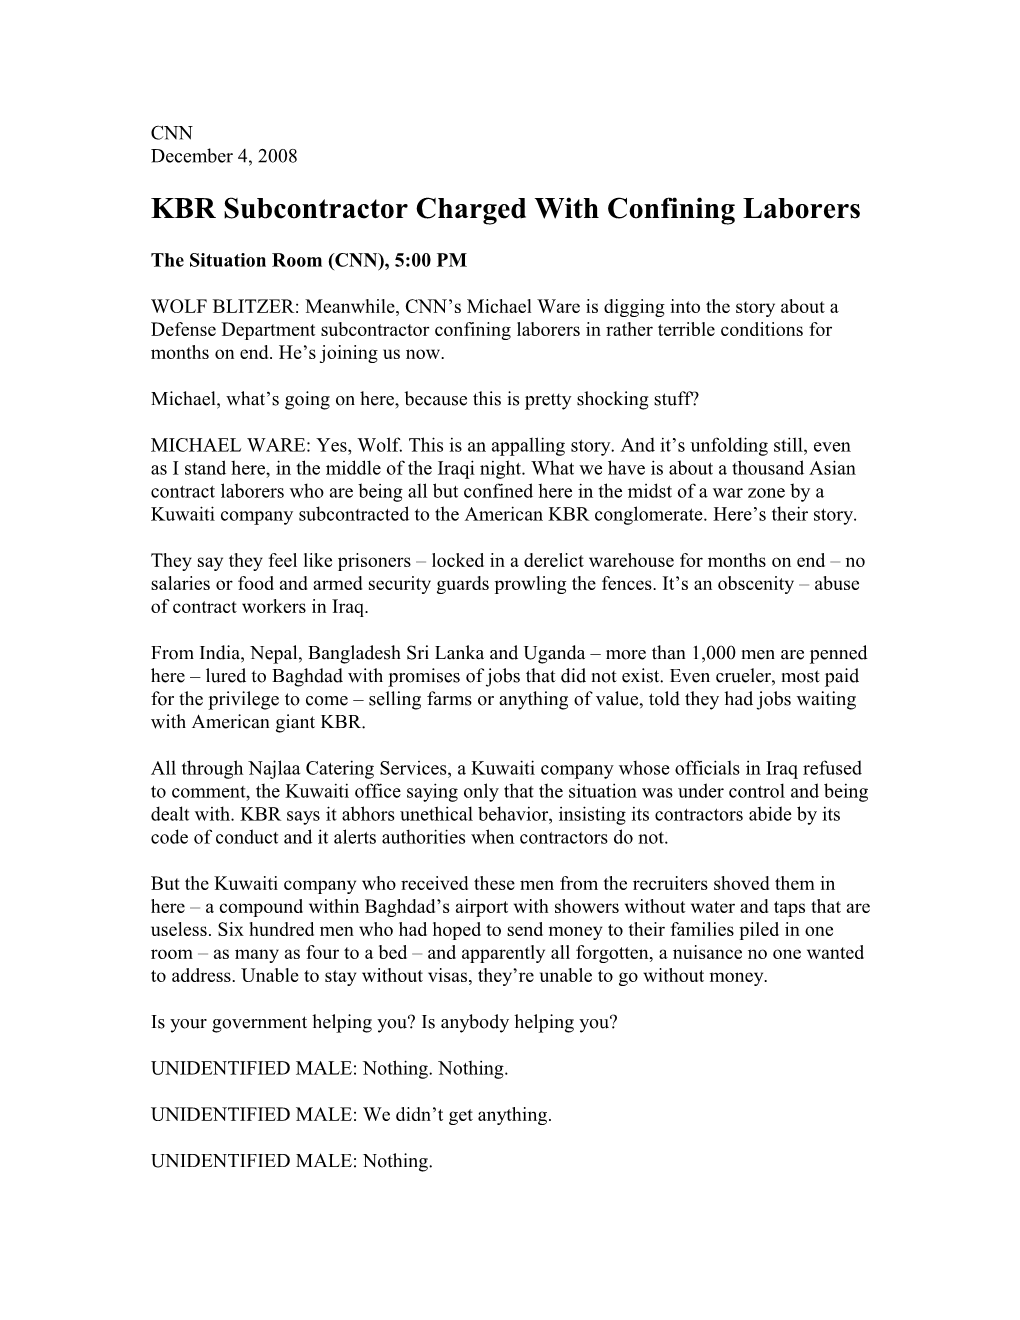 KBR Subcontractor Charged with Confining Laborers